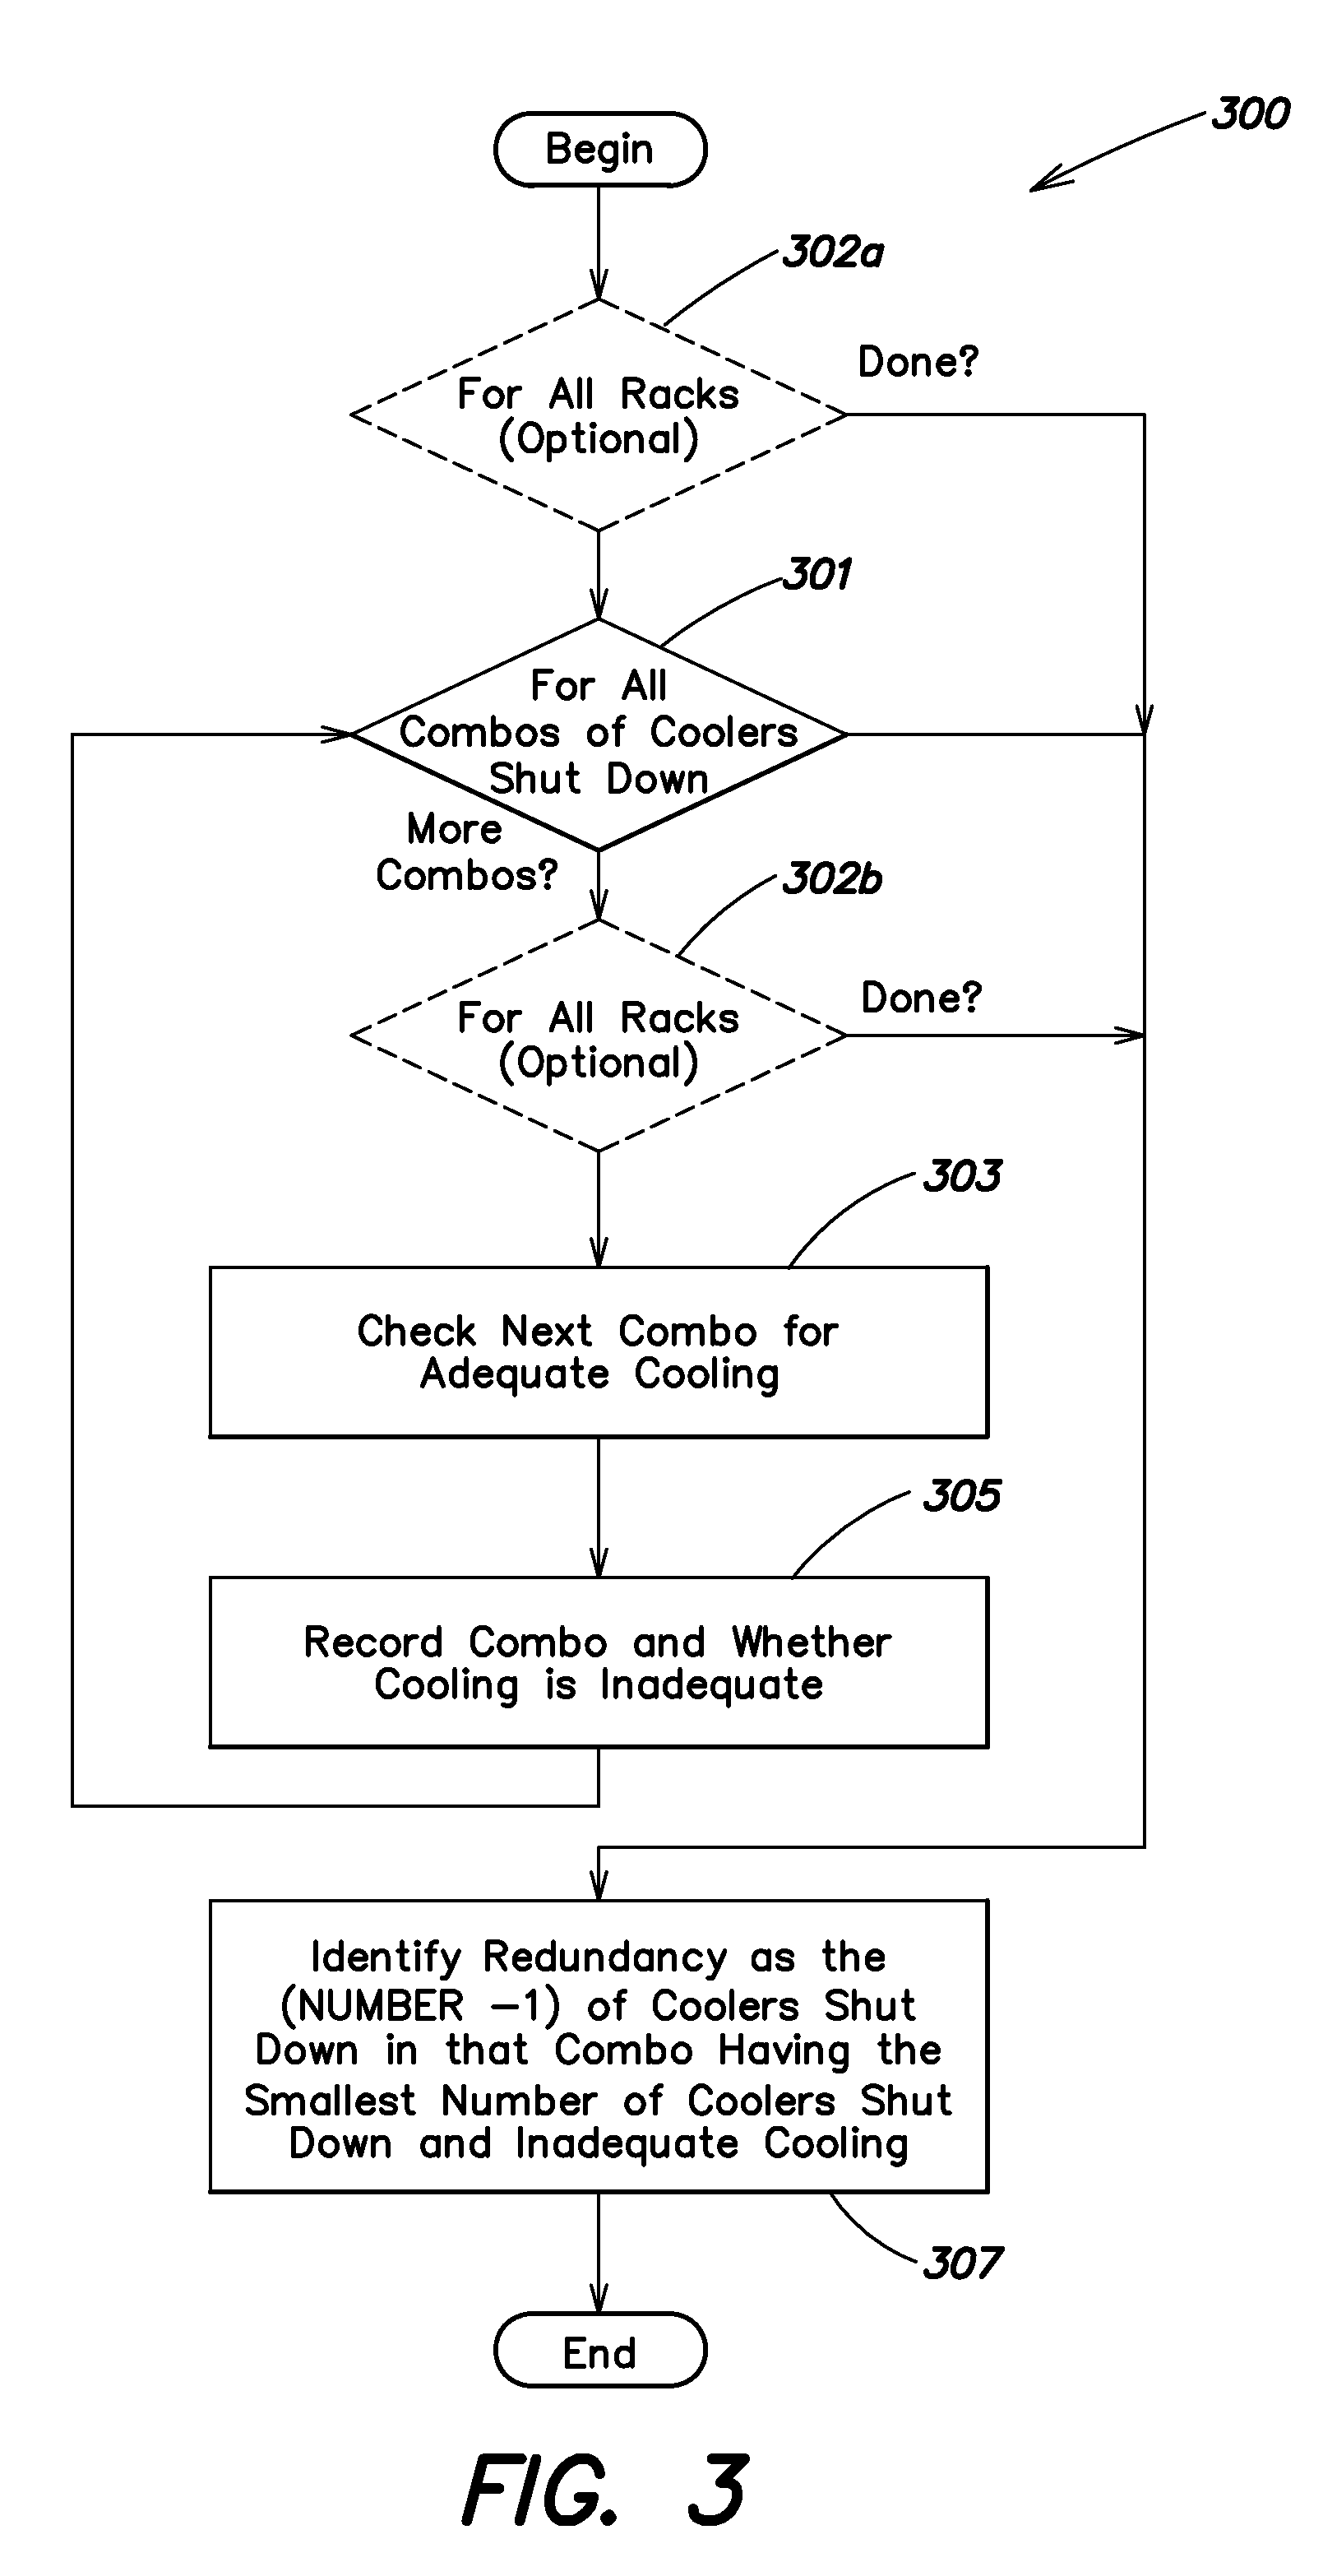 Method for computing cooling redundancy at the rack level